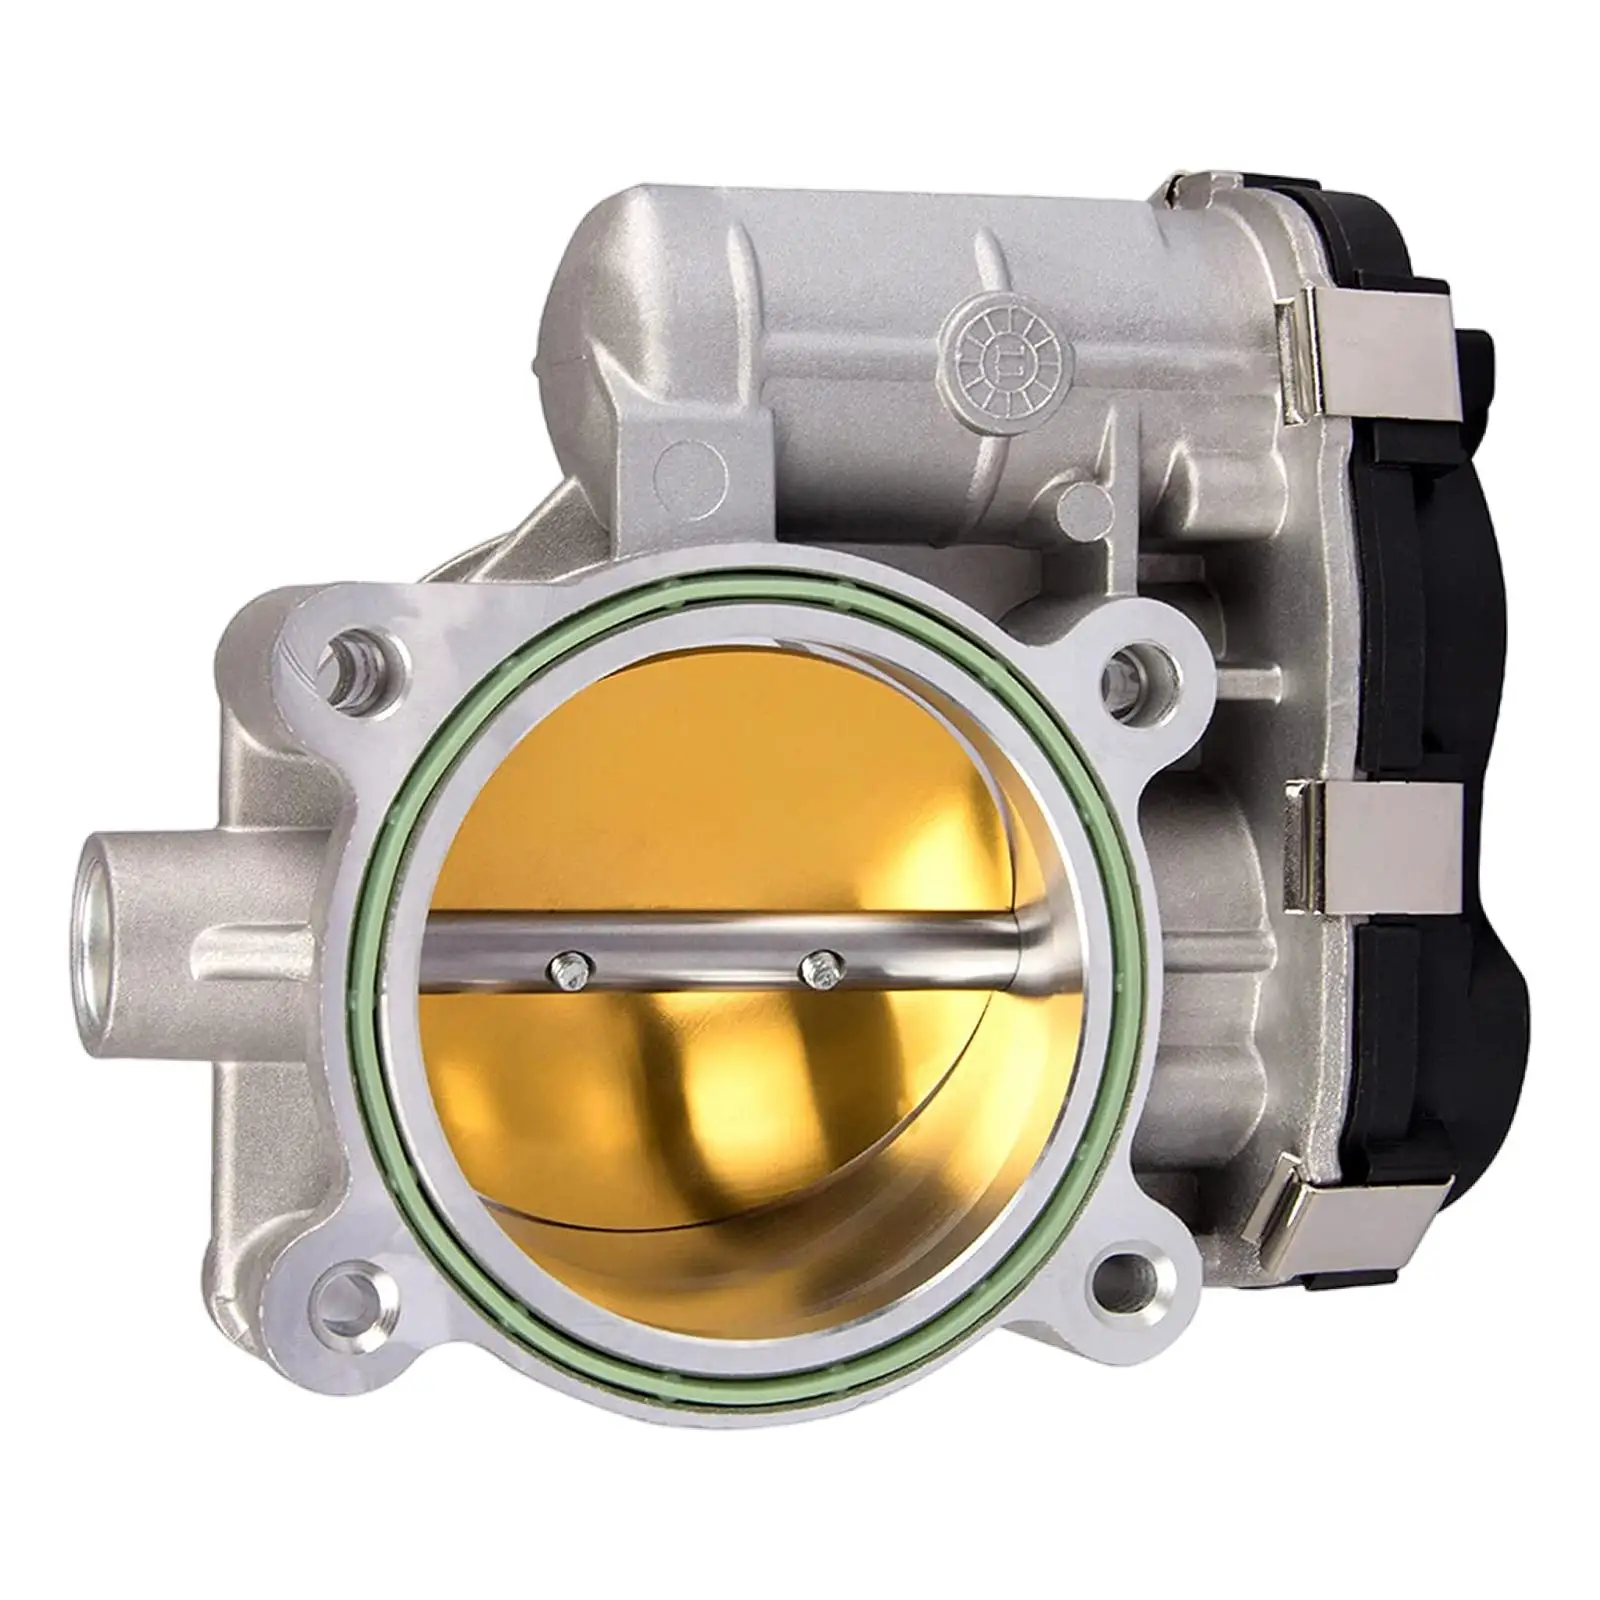 Fuel Throttle Body/ Replace 977-008 67-3002 S20009 2173108 Assembly/ 217-3108 Etb00172298 Tbr00 for   Vue Relay